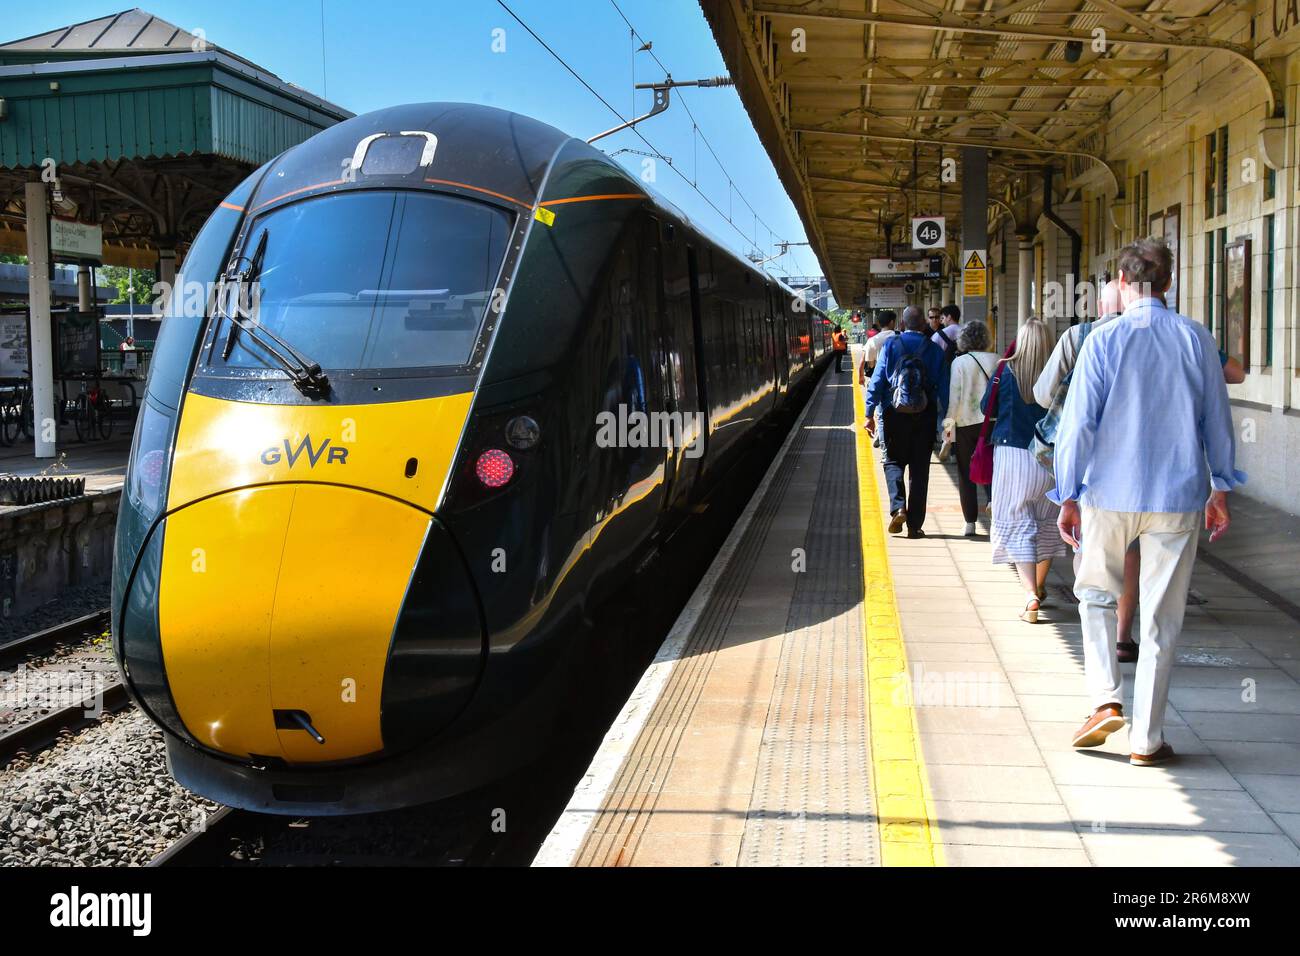 Cardiff, Wales - June 2023: High speed train operated by Great Western Railway at Cardiff Central railway station with passengers on the platform Stock Photo